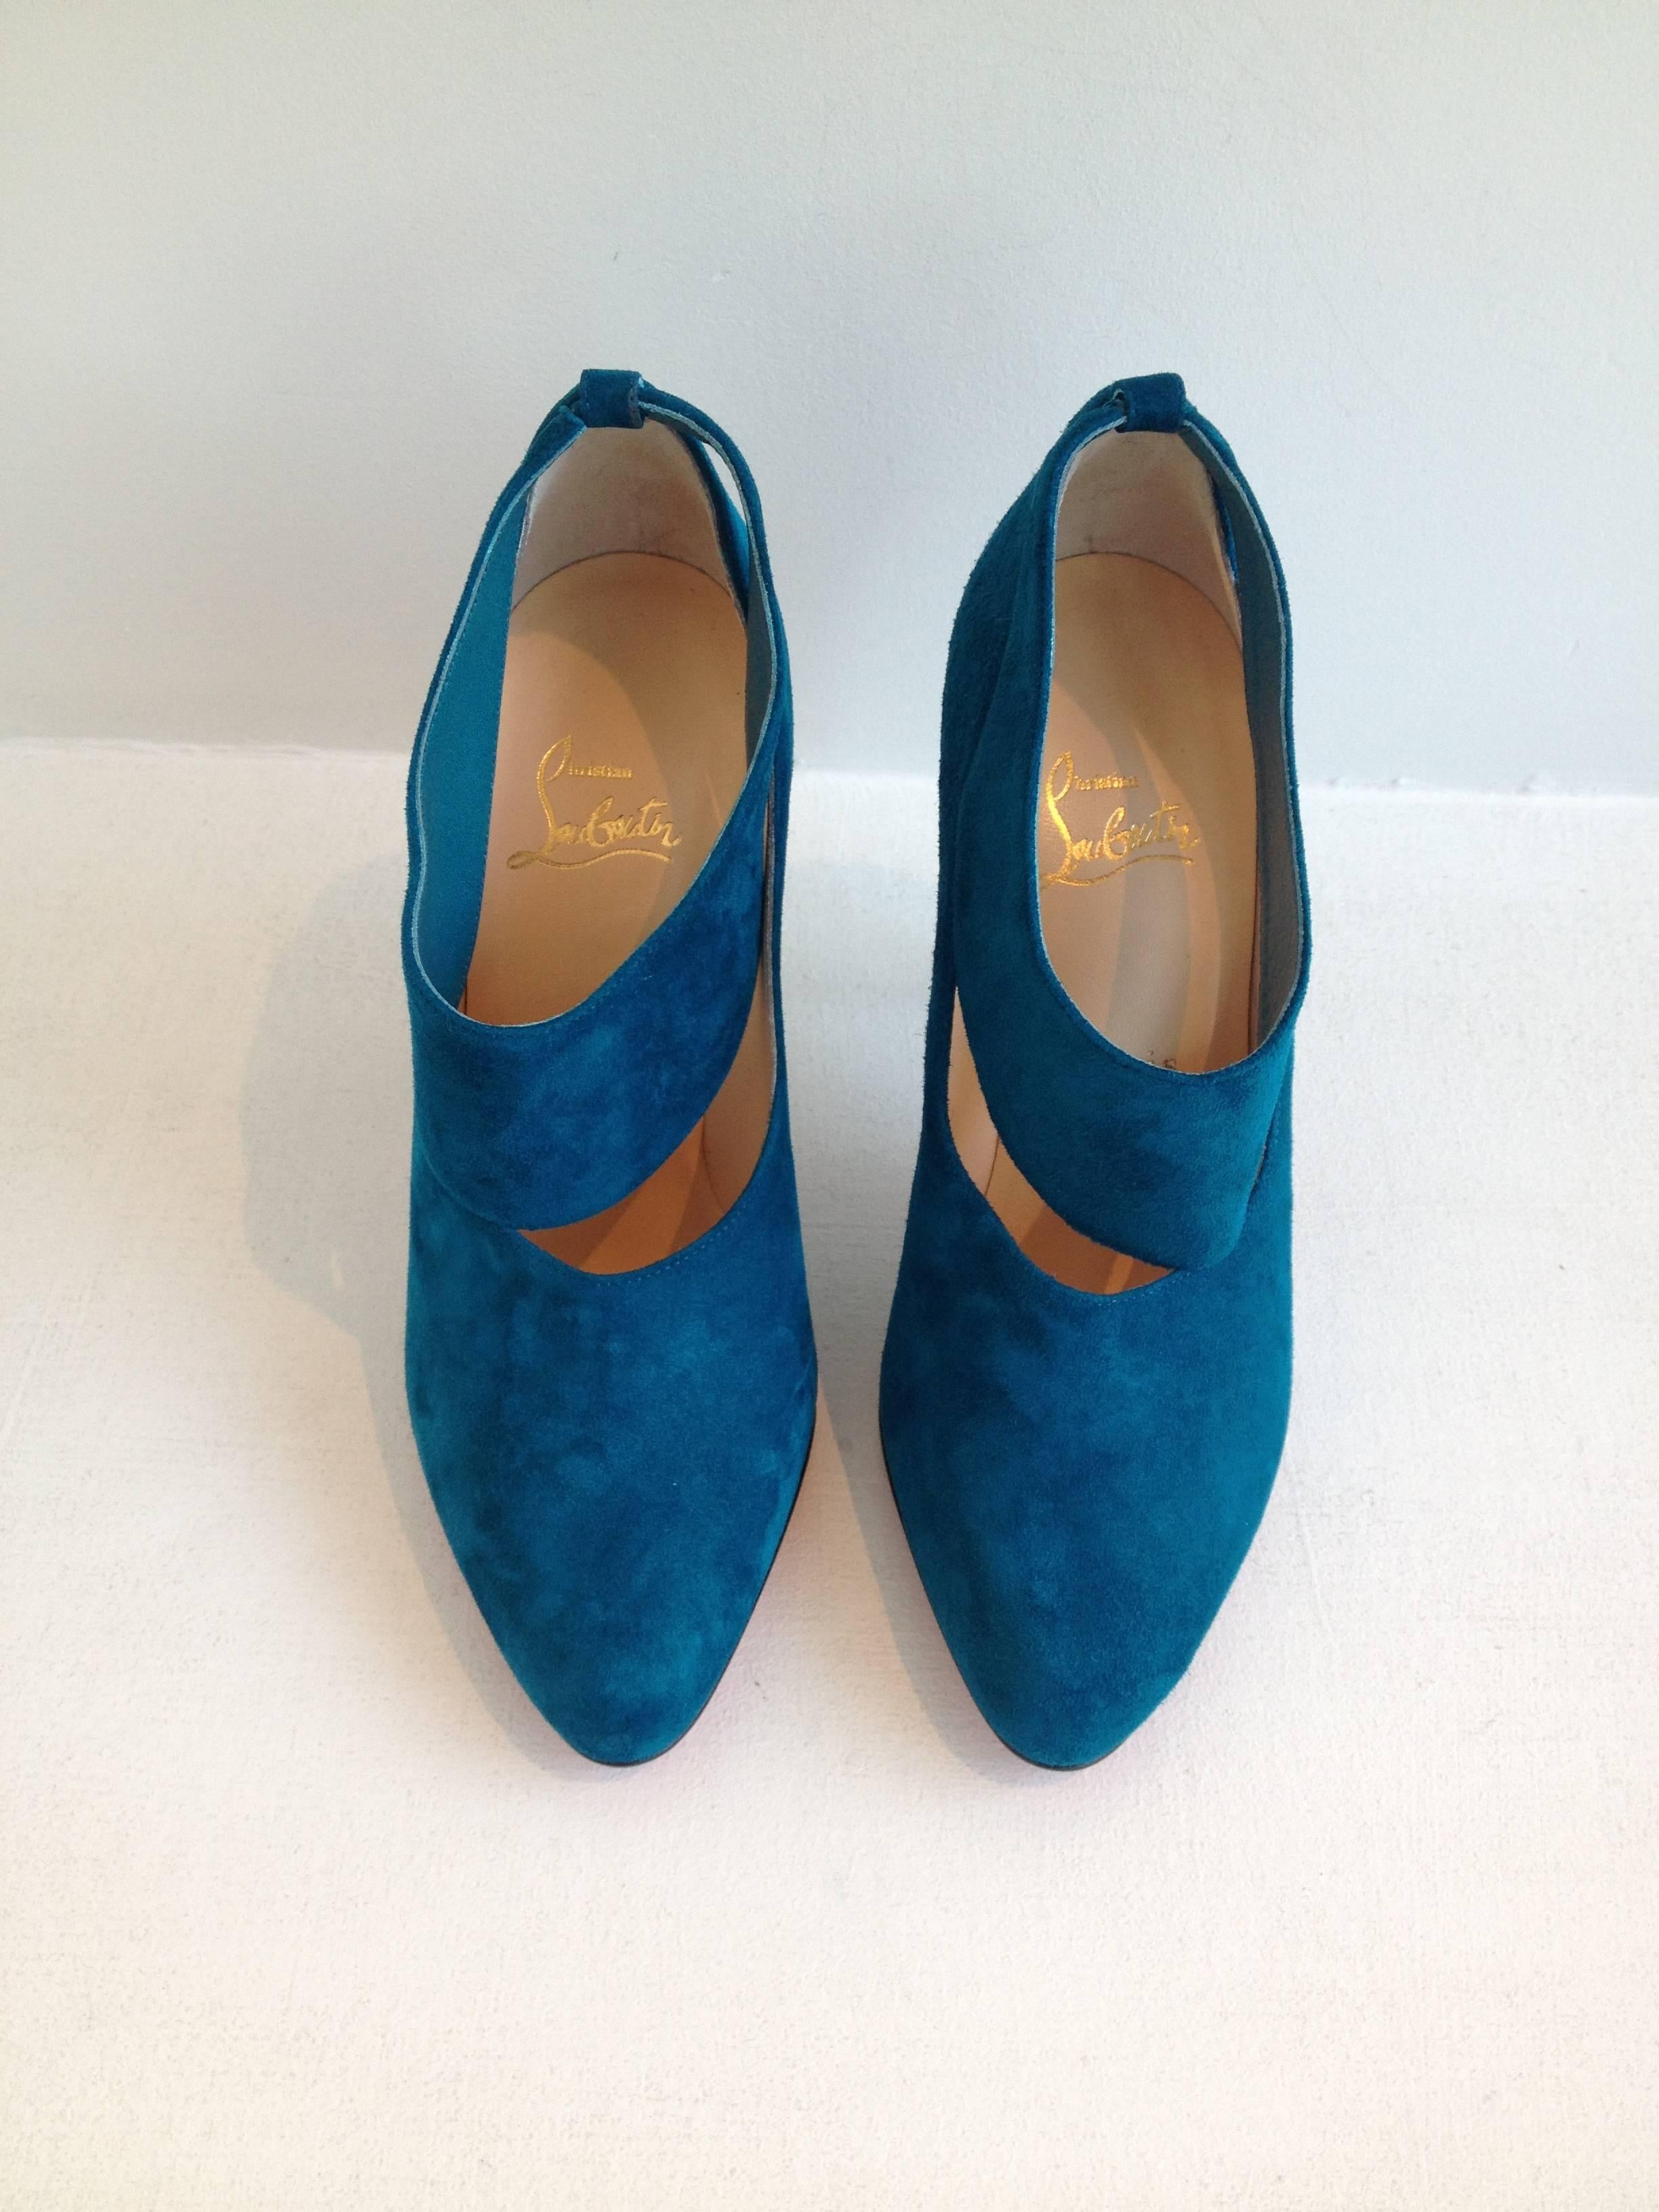 The bold peacock blue suede of these gorgeous Louboutin heels will always ensure you a grand entrance. They are constructed with a high cut front, with a wide strap that falls over the front of the foot and the heel is 4 inches.